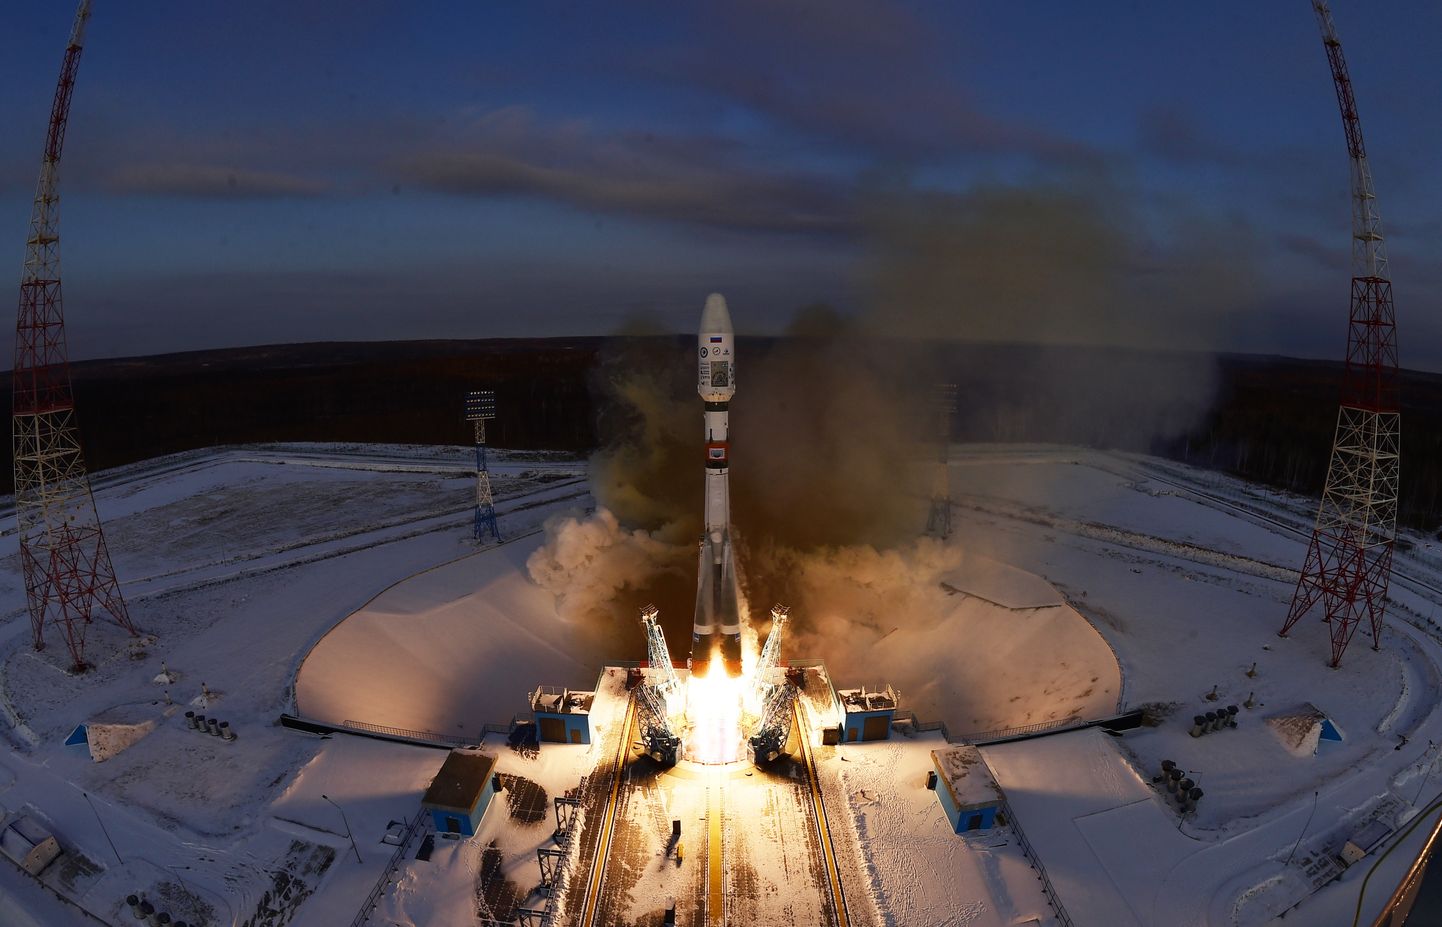 AMUR REGION, RUSSIA - NOVEMBER 28, 2017: A Soyuz 2.1b rocket booster with a Frigate upper stage block, the Meteor-M 2-1 meteorological satellite and 18 small satellites being launched from the Vostochny Cosmodrome. Yuri Smityuk/TASS